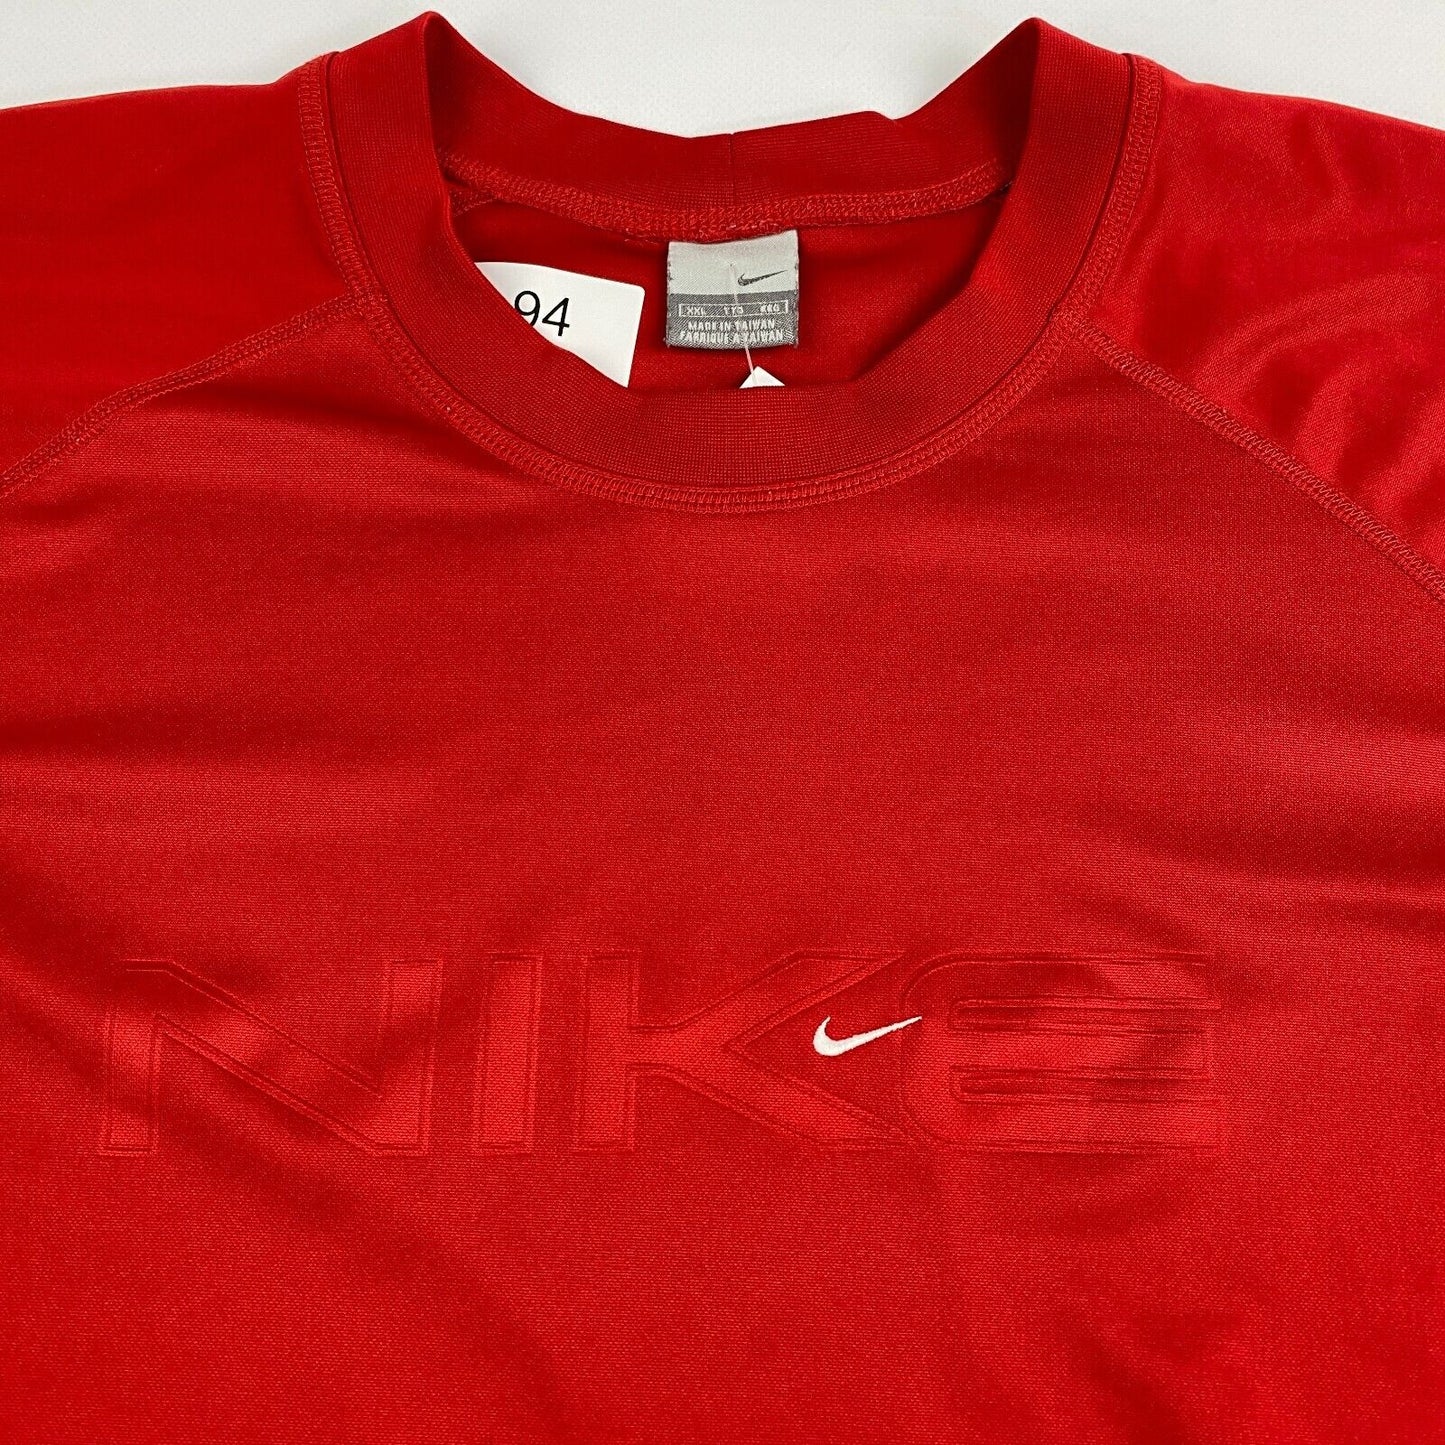 VINTAGE Nike Sm Swoosh Embroidered Red Jersey Performance T-Shirt sz XXL Mens